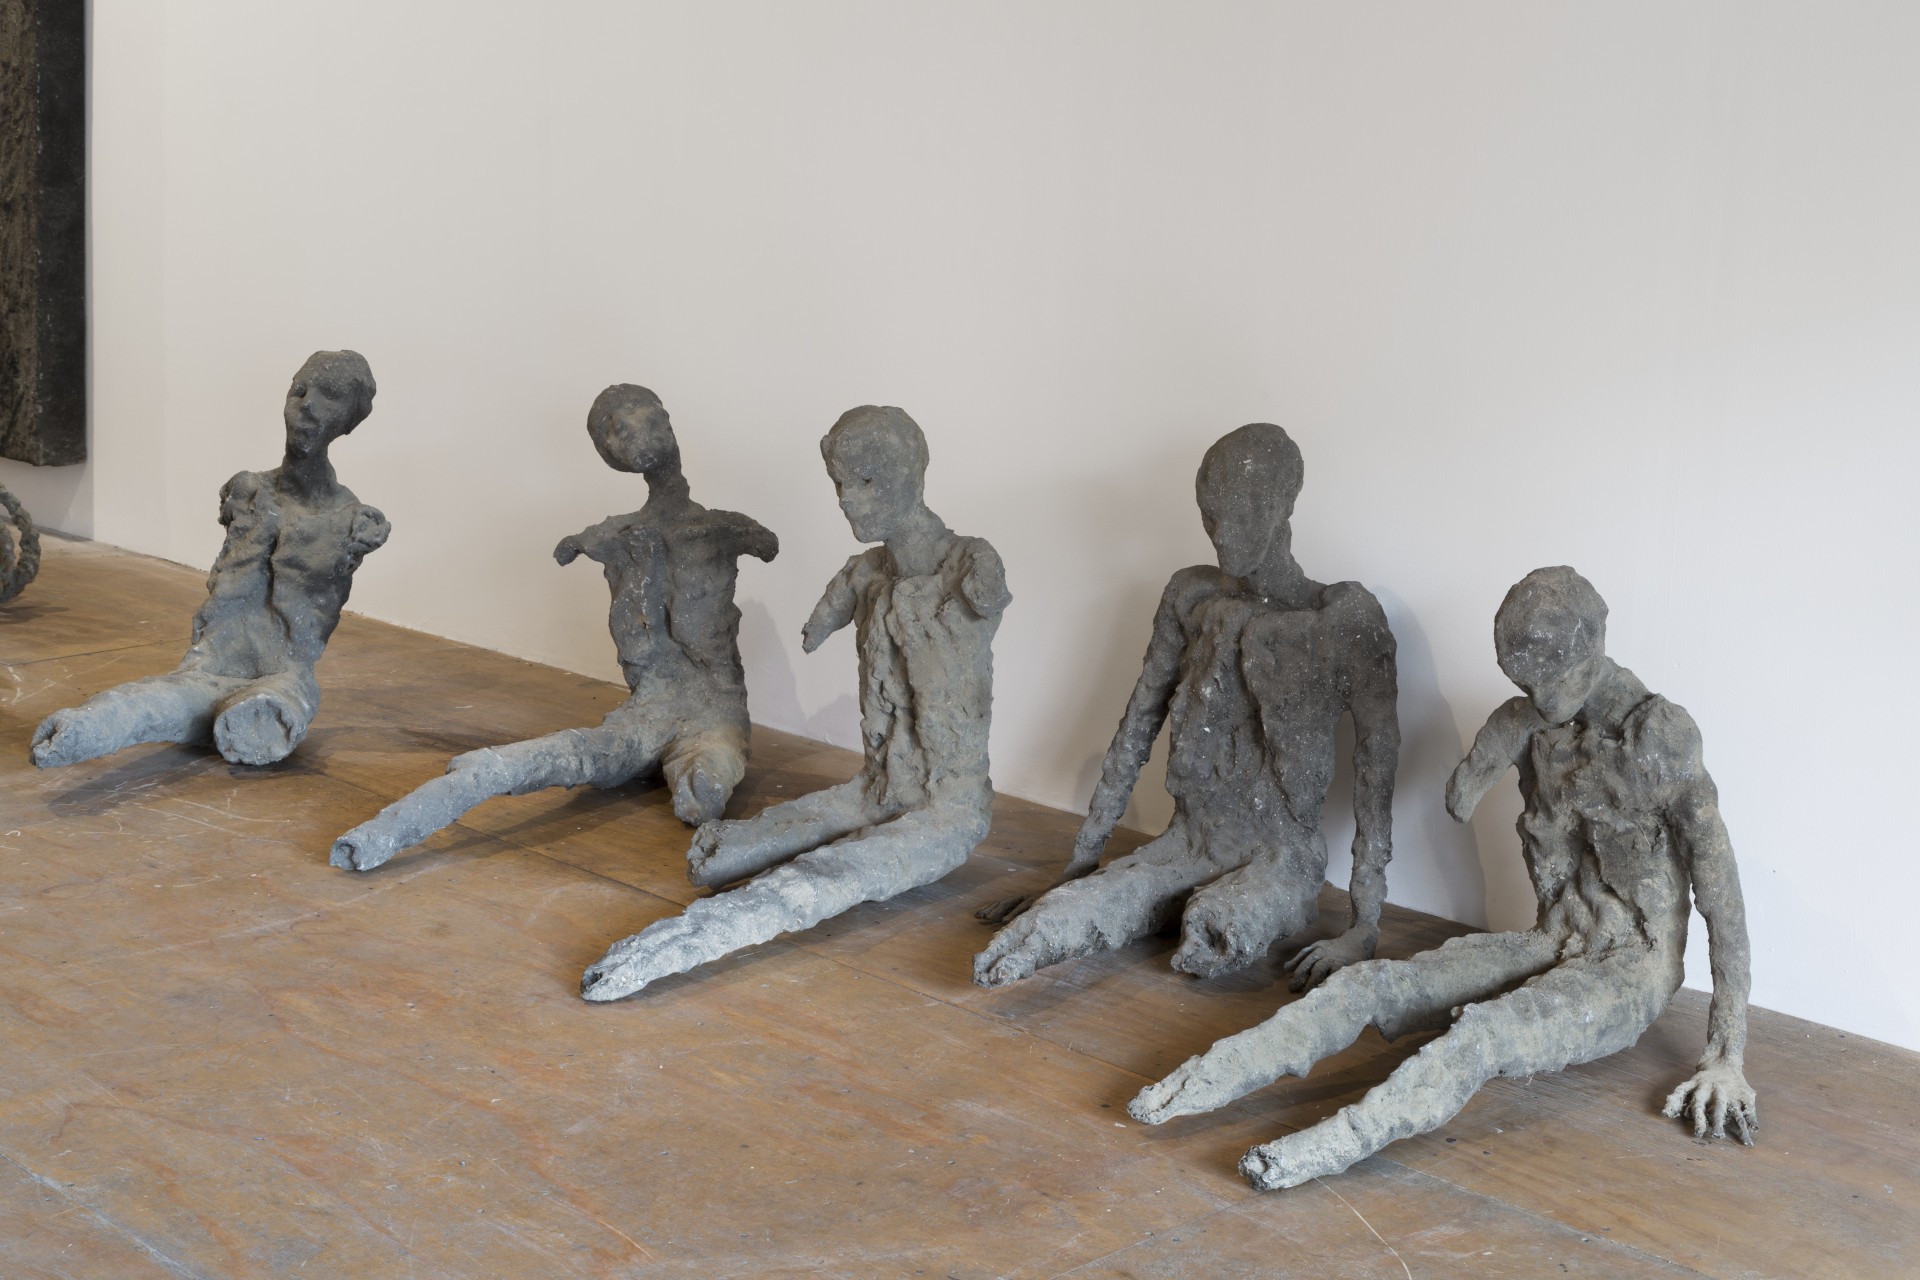 Luther Price, *Ground Piece One, (Five Life-size Figures)*, 1982-83. Plastic, metal, dirt